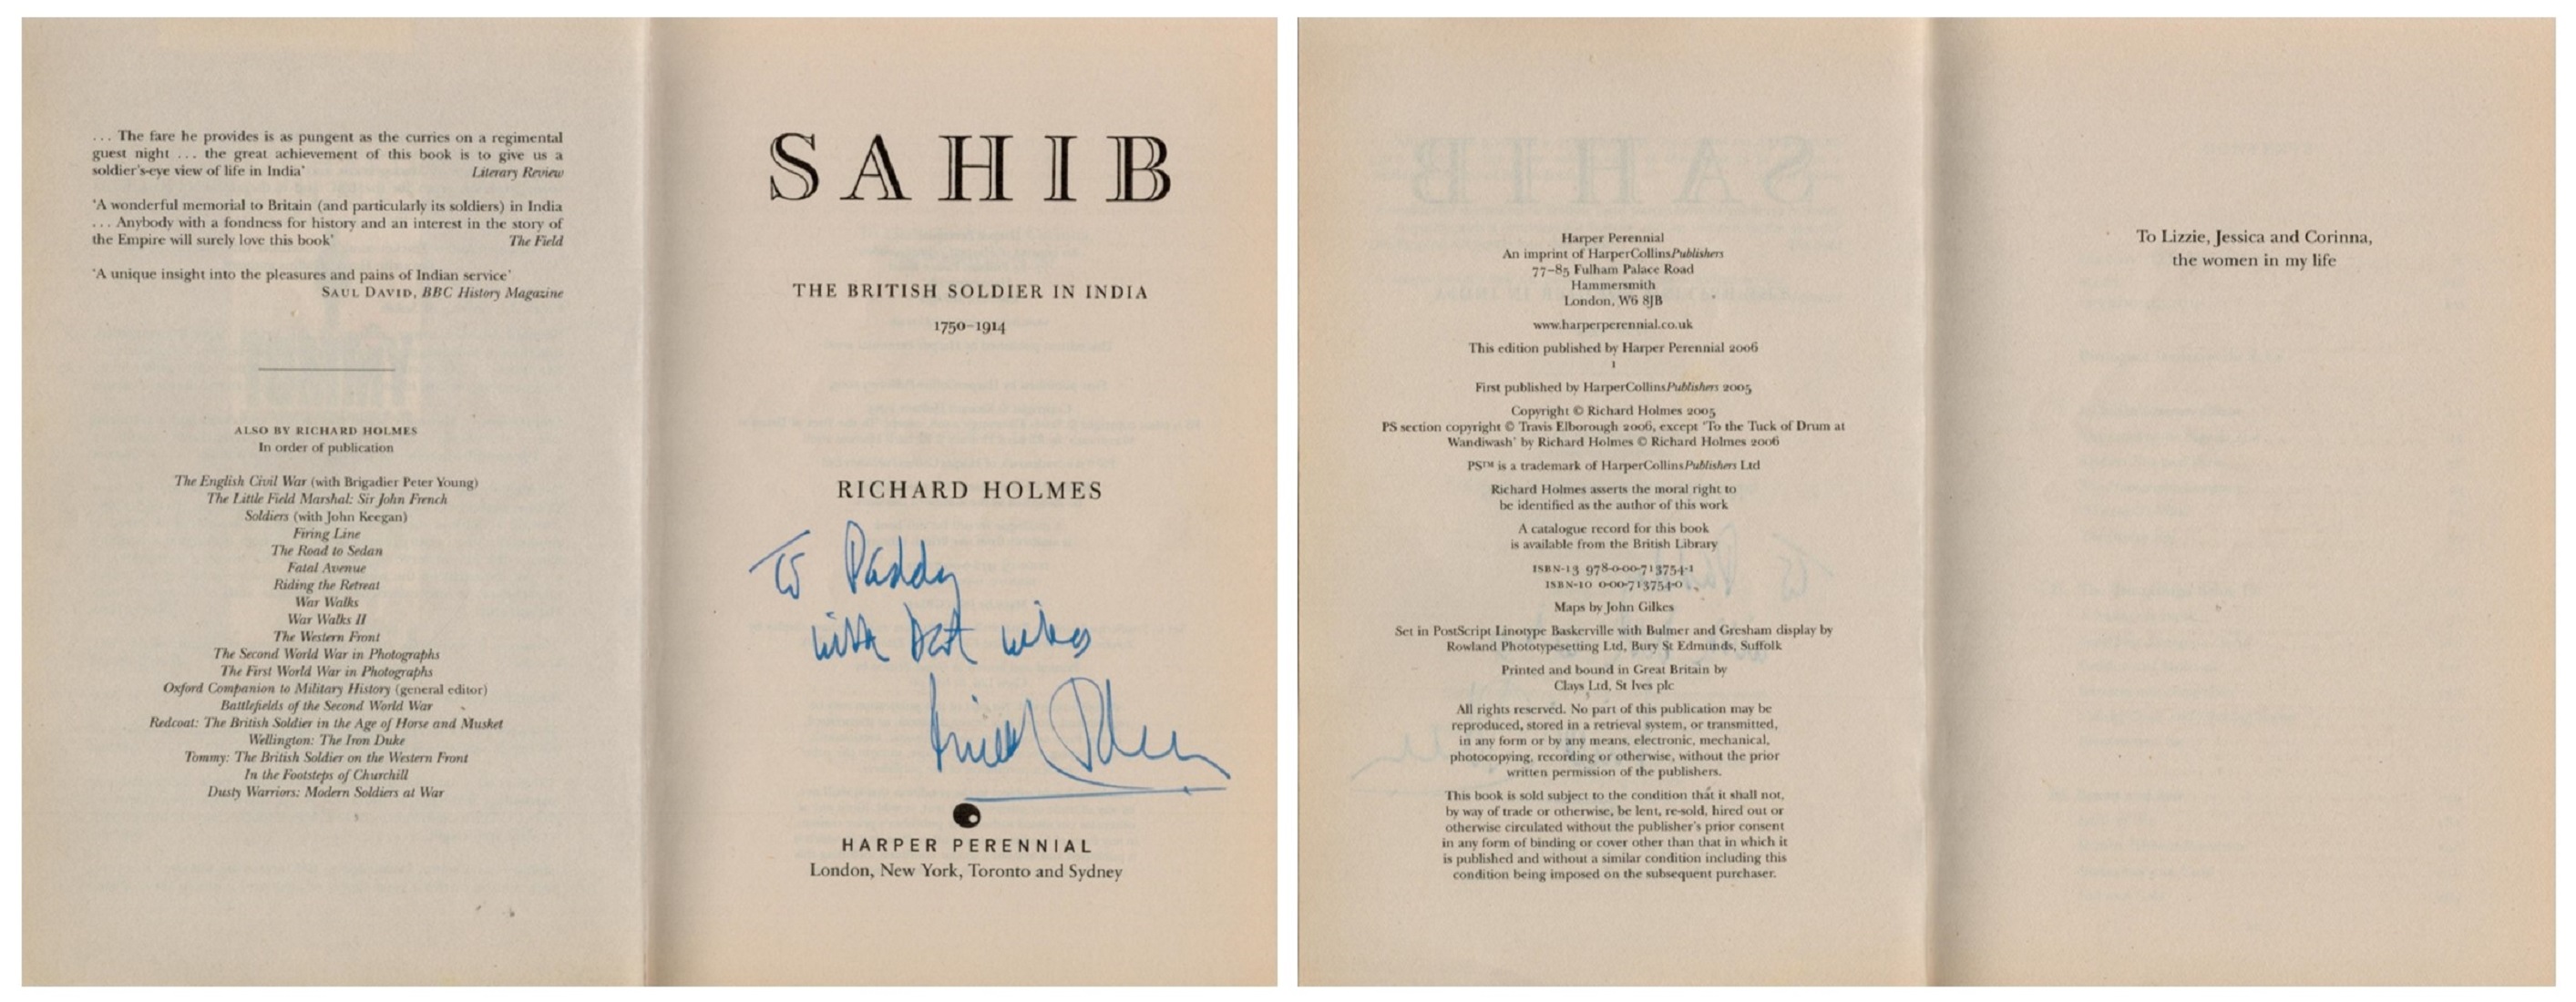 SAHIB The British Soldier In India 1750-1914 Signed by Author Richard Holmes Paperback book. - Image 2 of 2